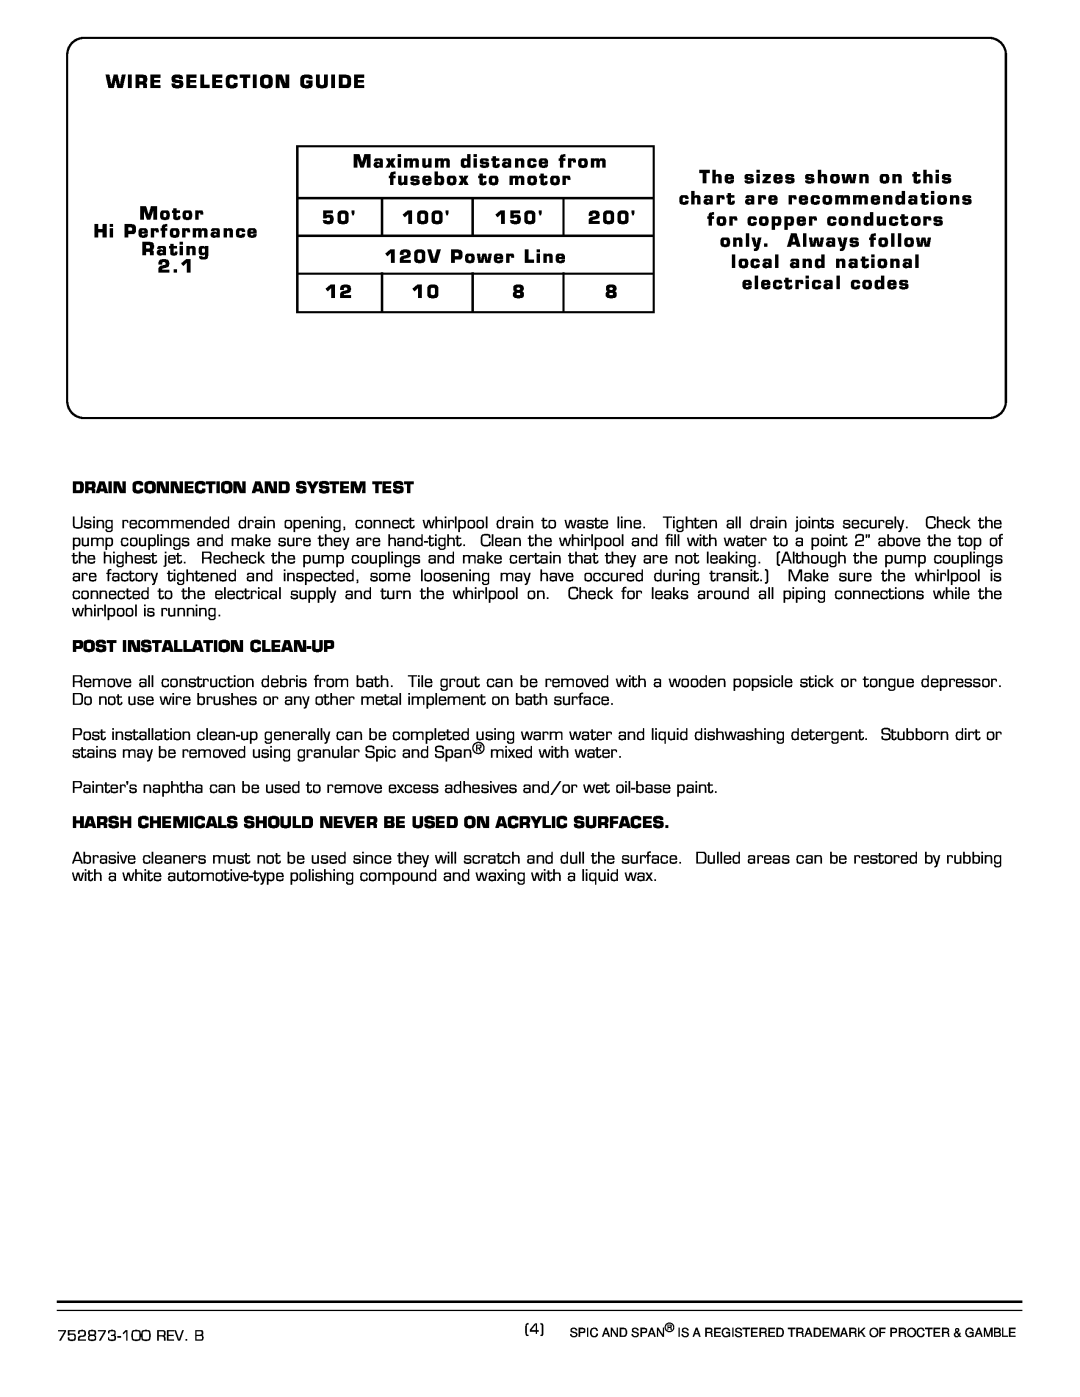 American Standard 2711E installation instructions Wire Selection Guide 